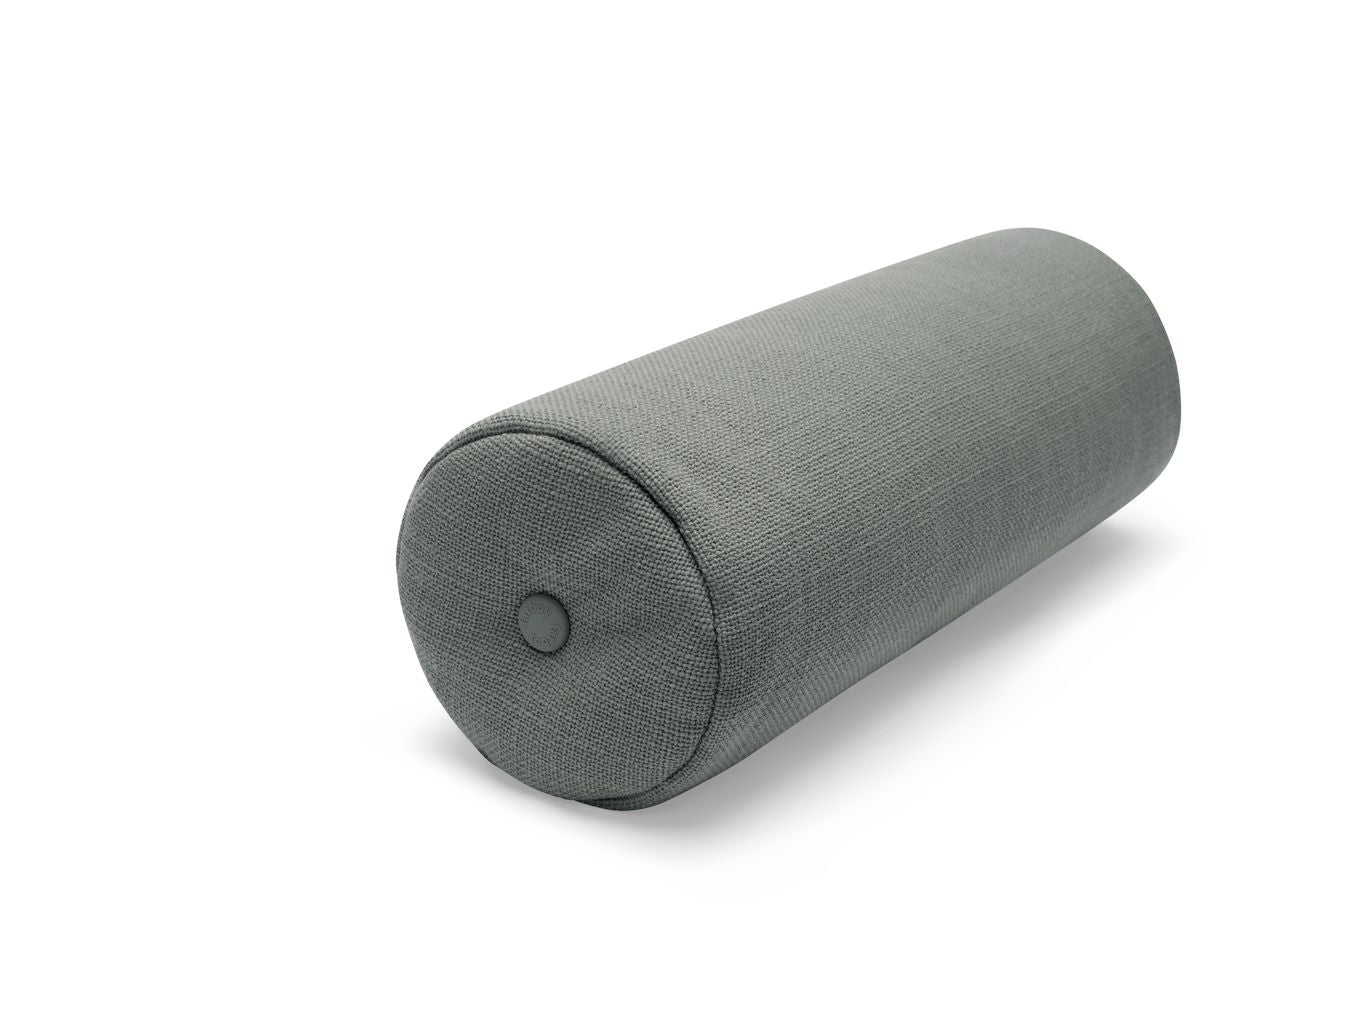 Fatboy Puff Weave Rolster Pillow, Mouse Gray